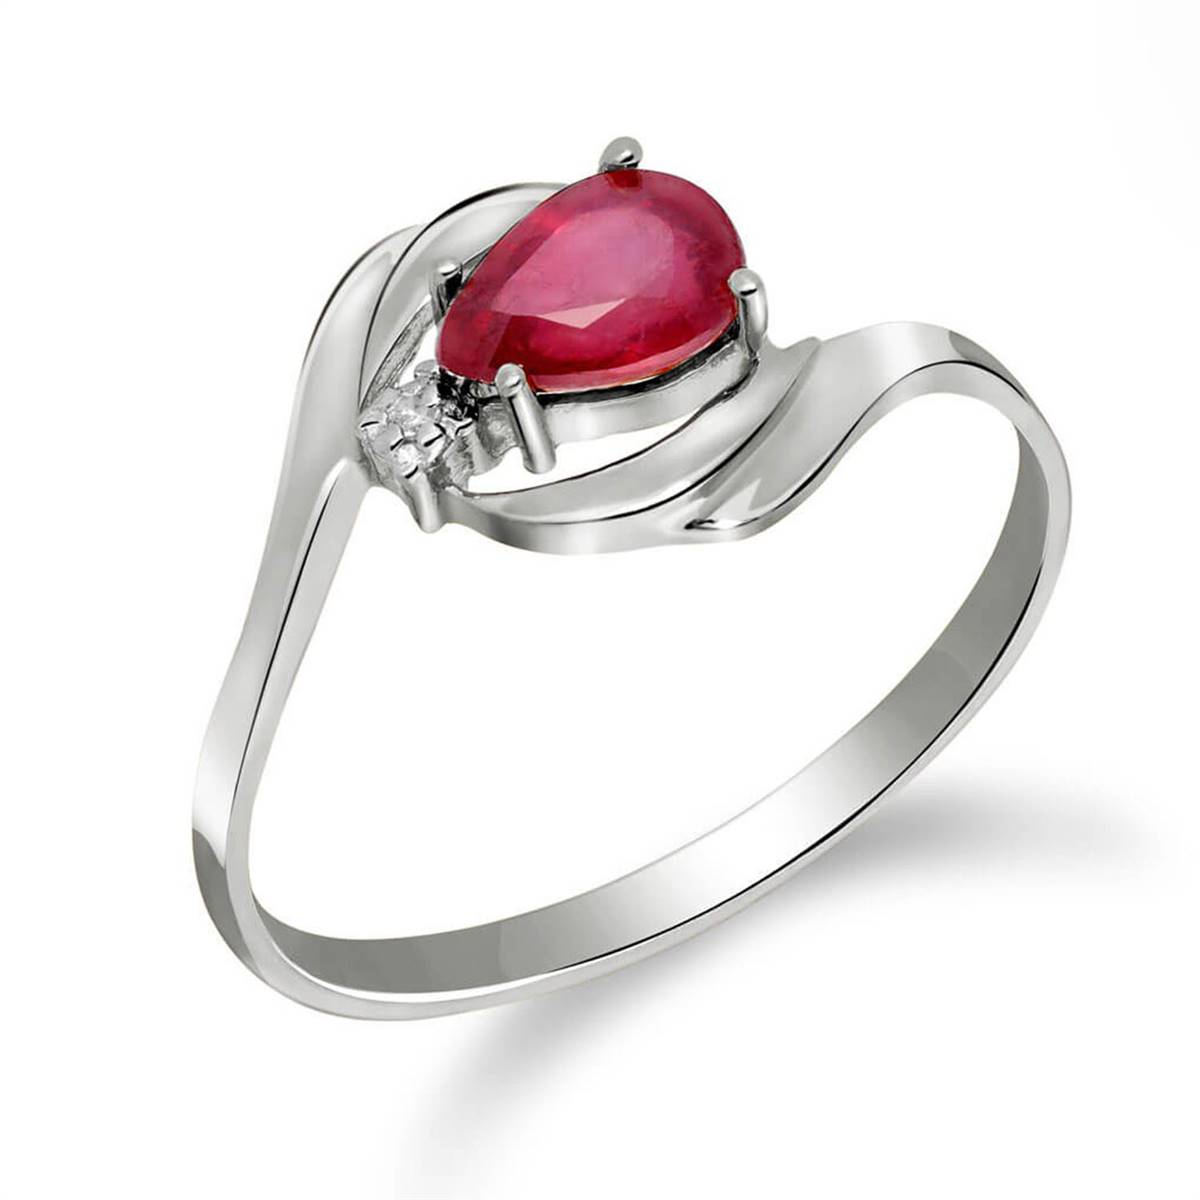 0.51 Carat 14K Solid White Gold Love Sees Ruby Diamond Ring